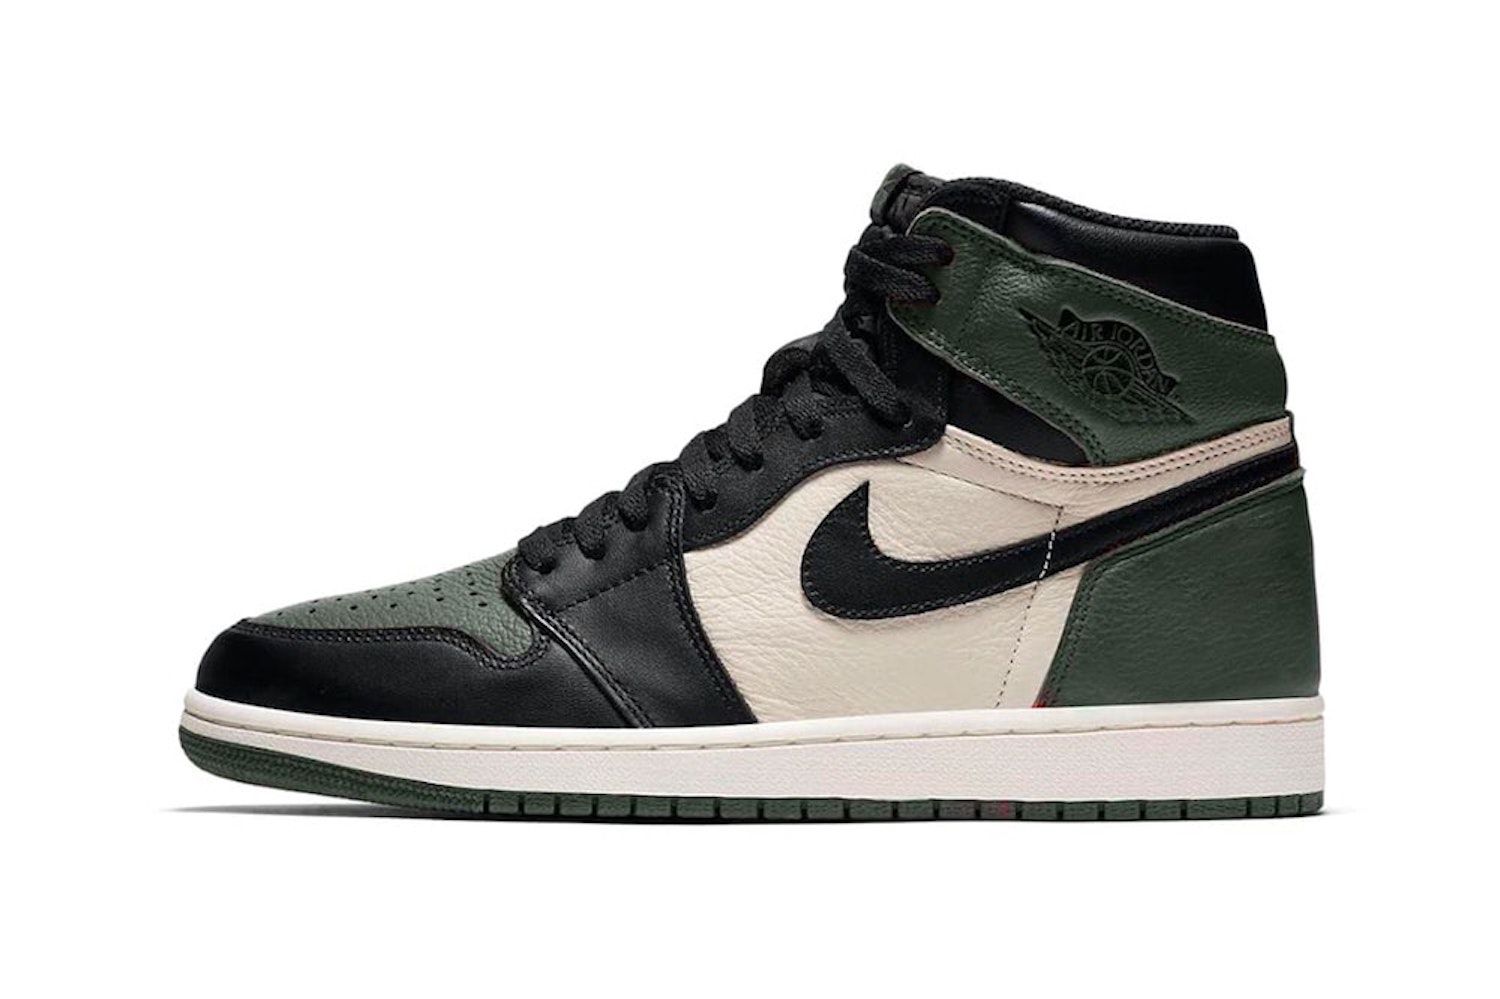 Your first look at the Air Jordan 1 OG High “Pine Green” - ICON